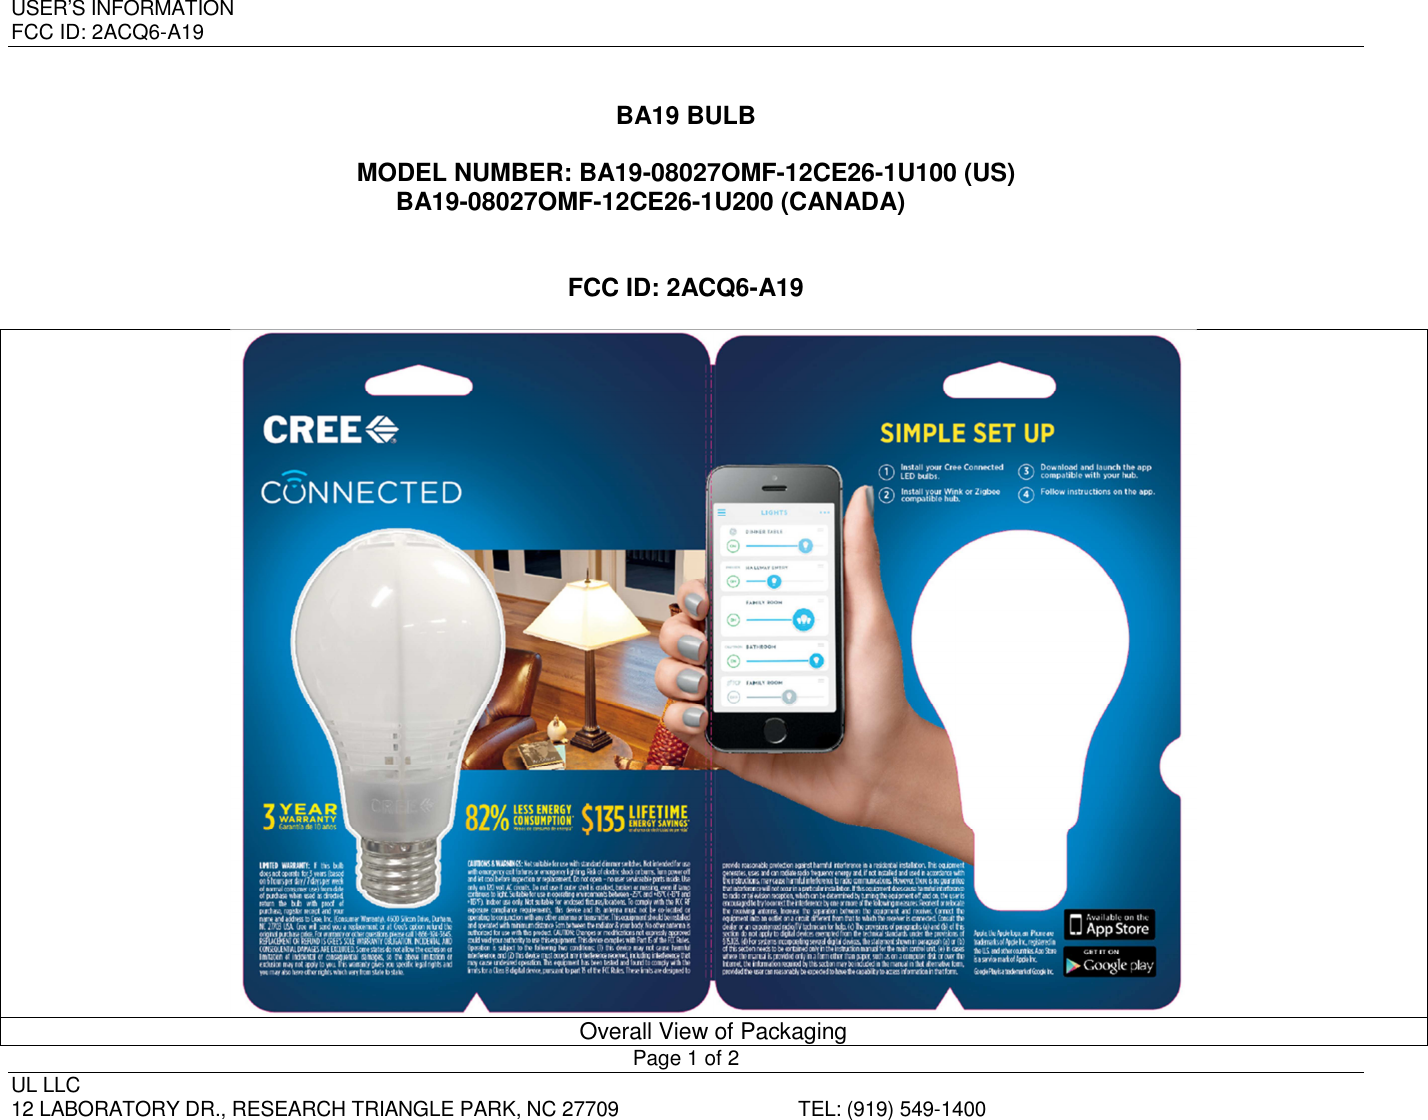 USER’S INFORMATION   FCC ID: 2ACQ6-A19       Page 1 of 2 UL LLC     12 LABORATORY DR., RESEARCH TRIANGLE PARK, NC 27709  TEL: (919) 549-1400 BA19 BULB  MODEL NUMBER: BA19-08027OMF-12CE26-1U100 (US) BA19-08027OMF-12CE26-1U200 (CANADA)   FCC ID: 2ACQ6-A19   Overall View of Packaging 